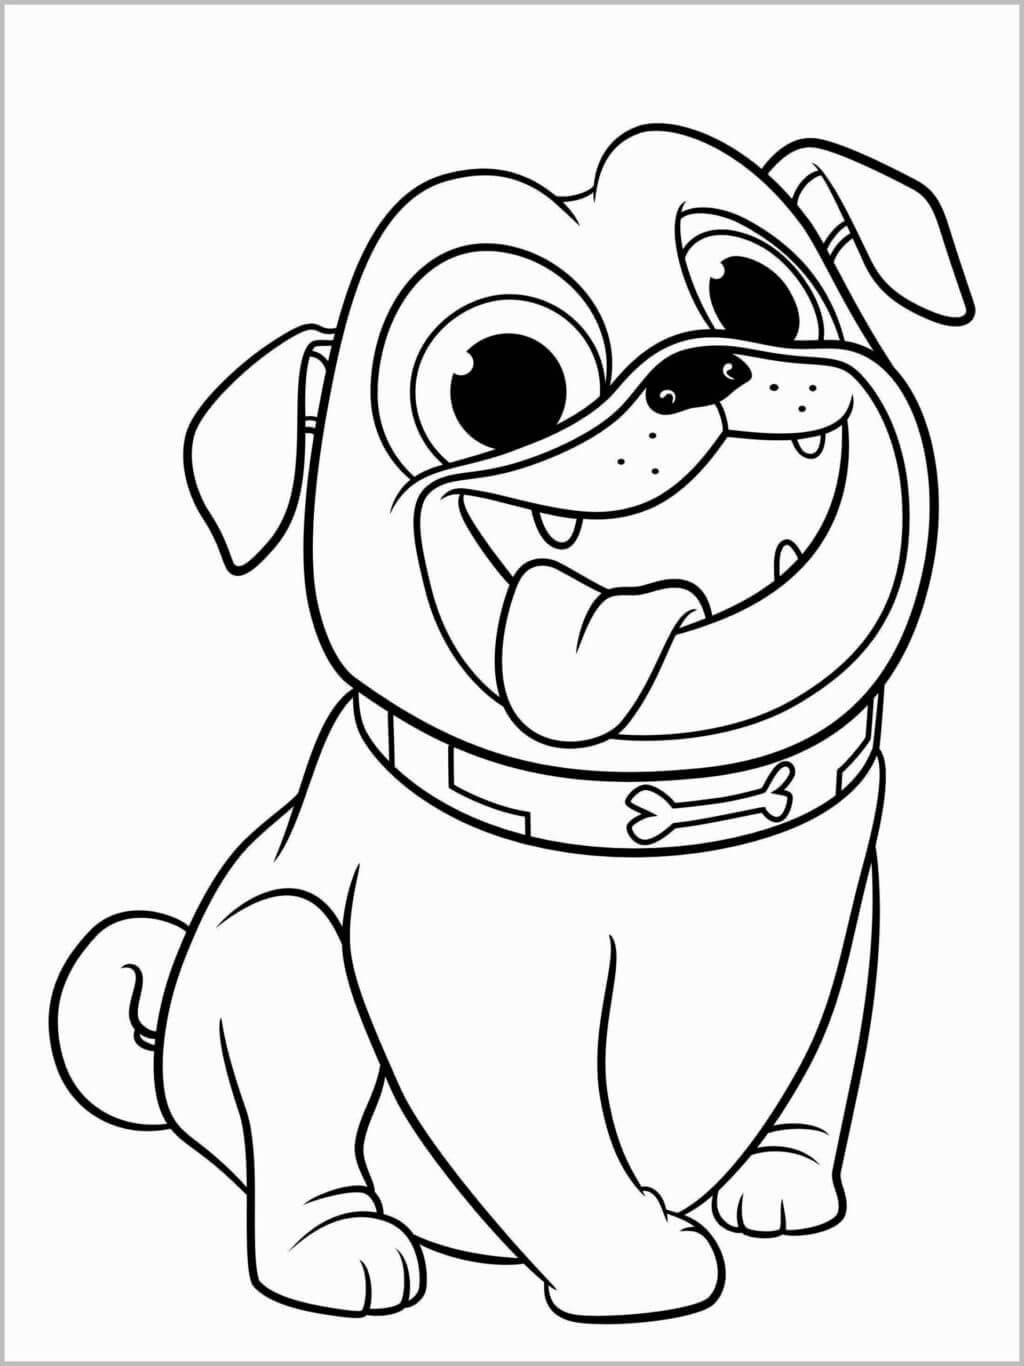 Puppy Dog Pals Coloring Pages - Visual Arts Ideas